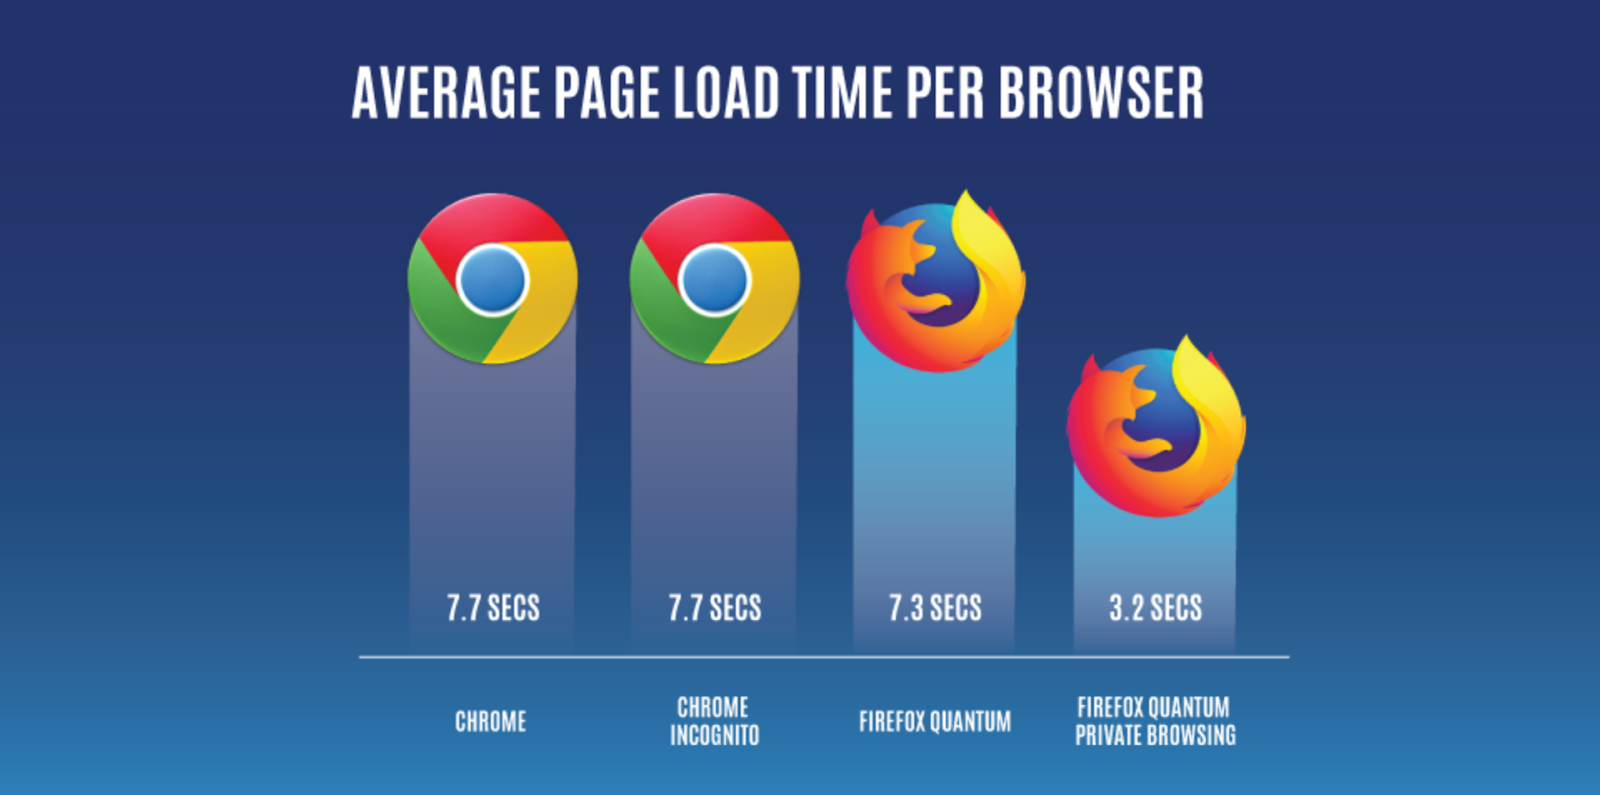 Is Chrome actually faster than Firefox?